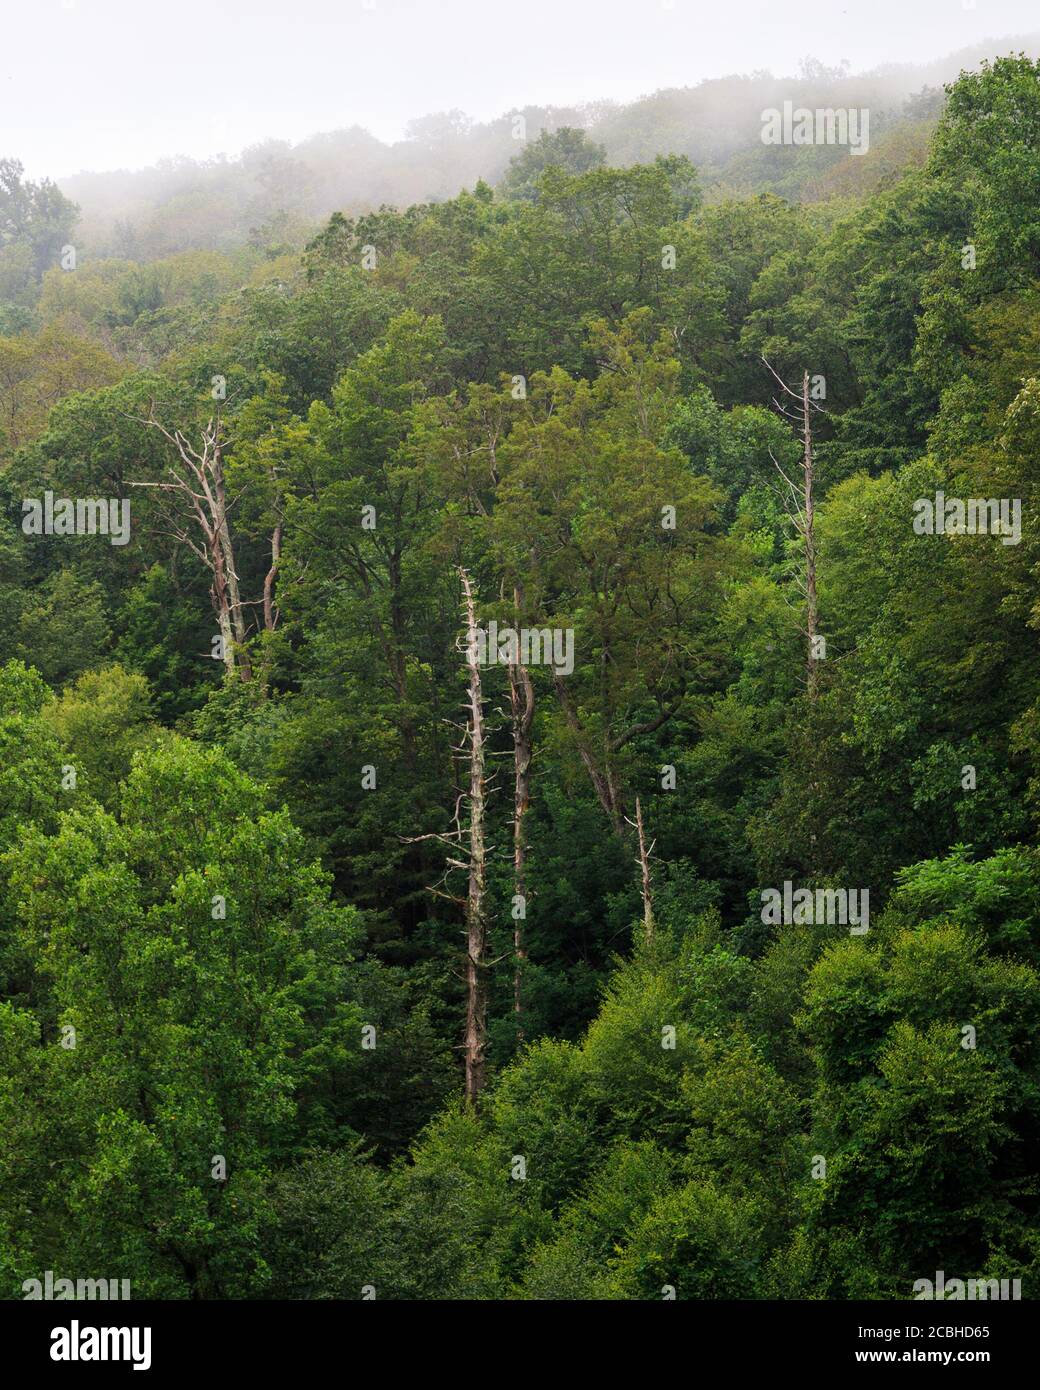 Dead hemlock trees in Whiteoak Canyon in the valleys of Shenandoah National Park, Virginia, United States Stock Photo